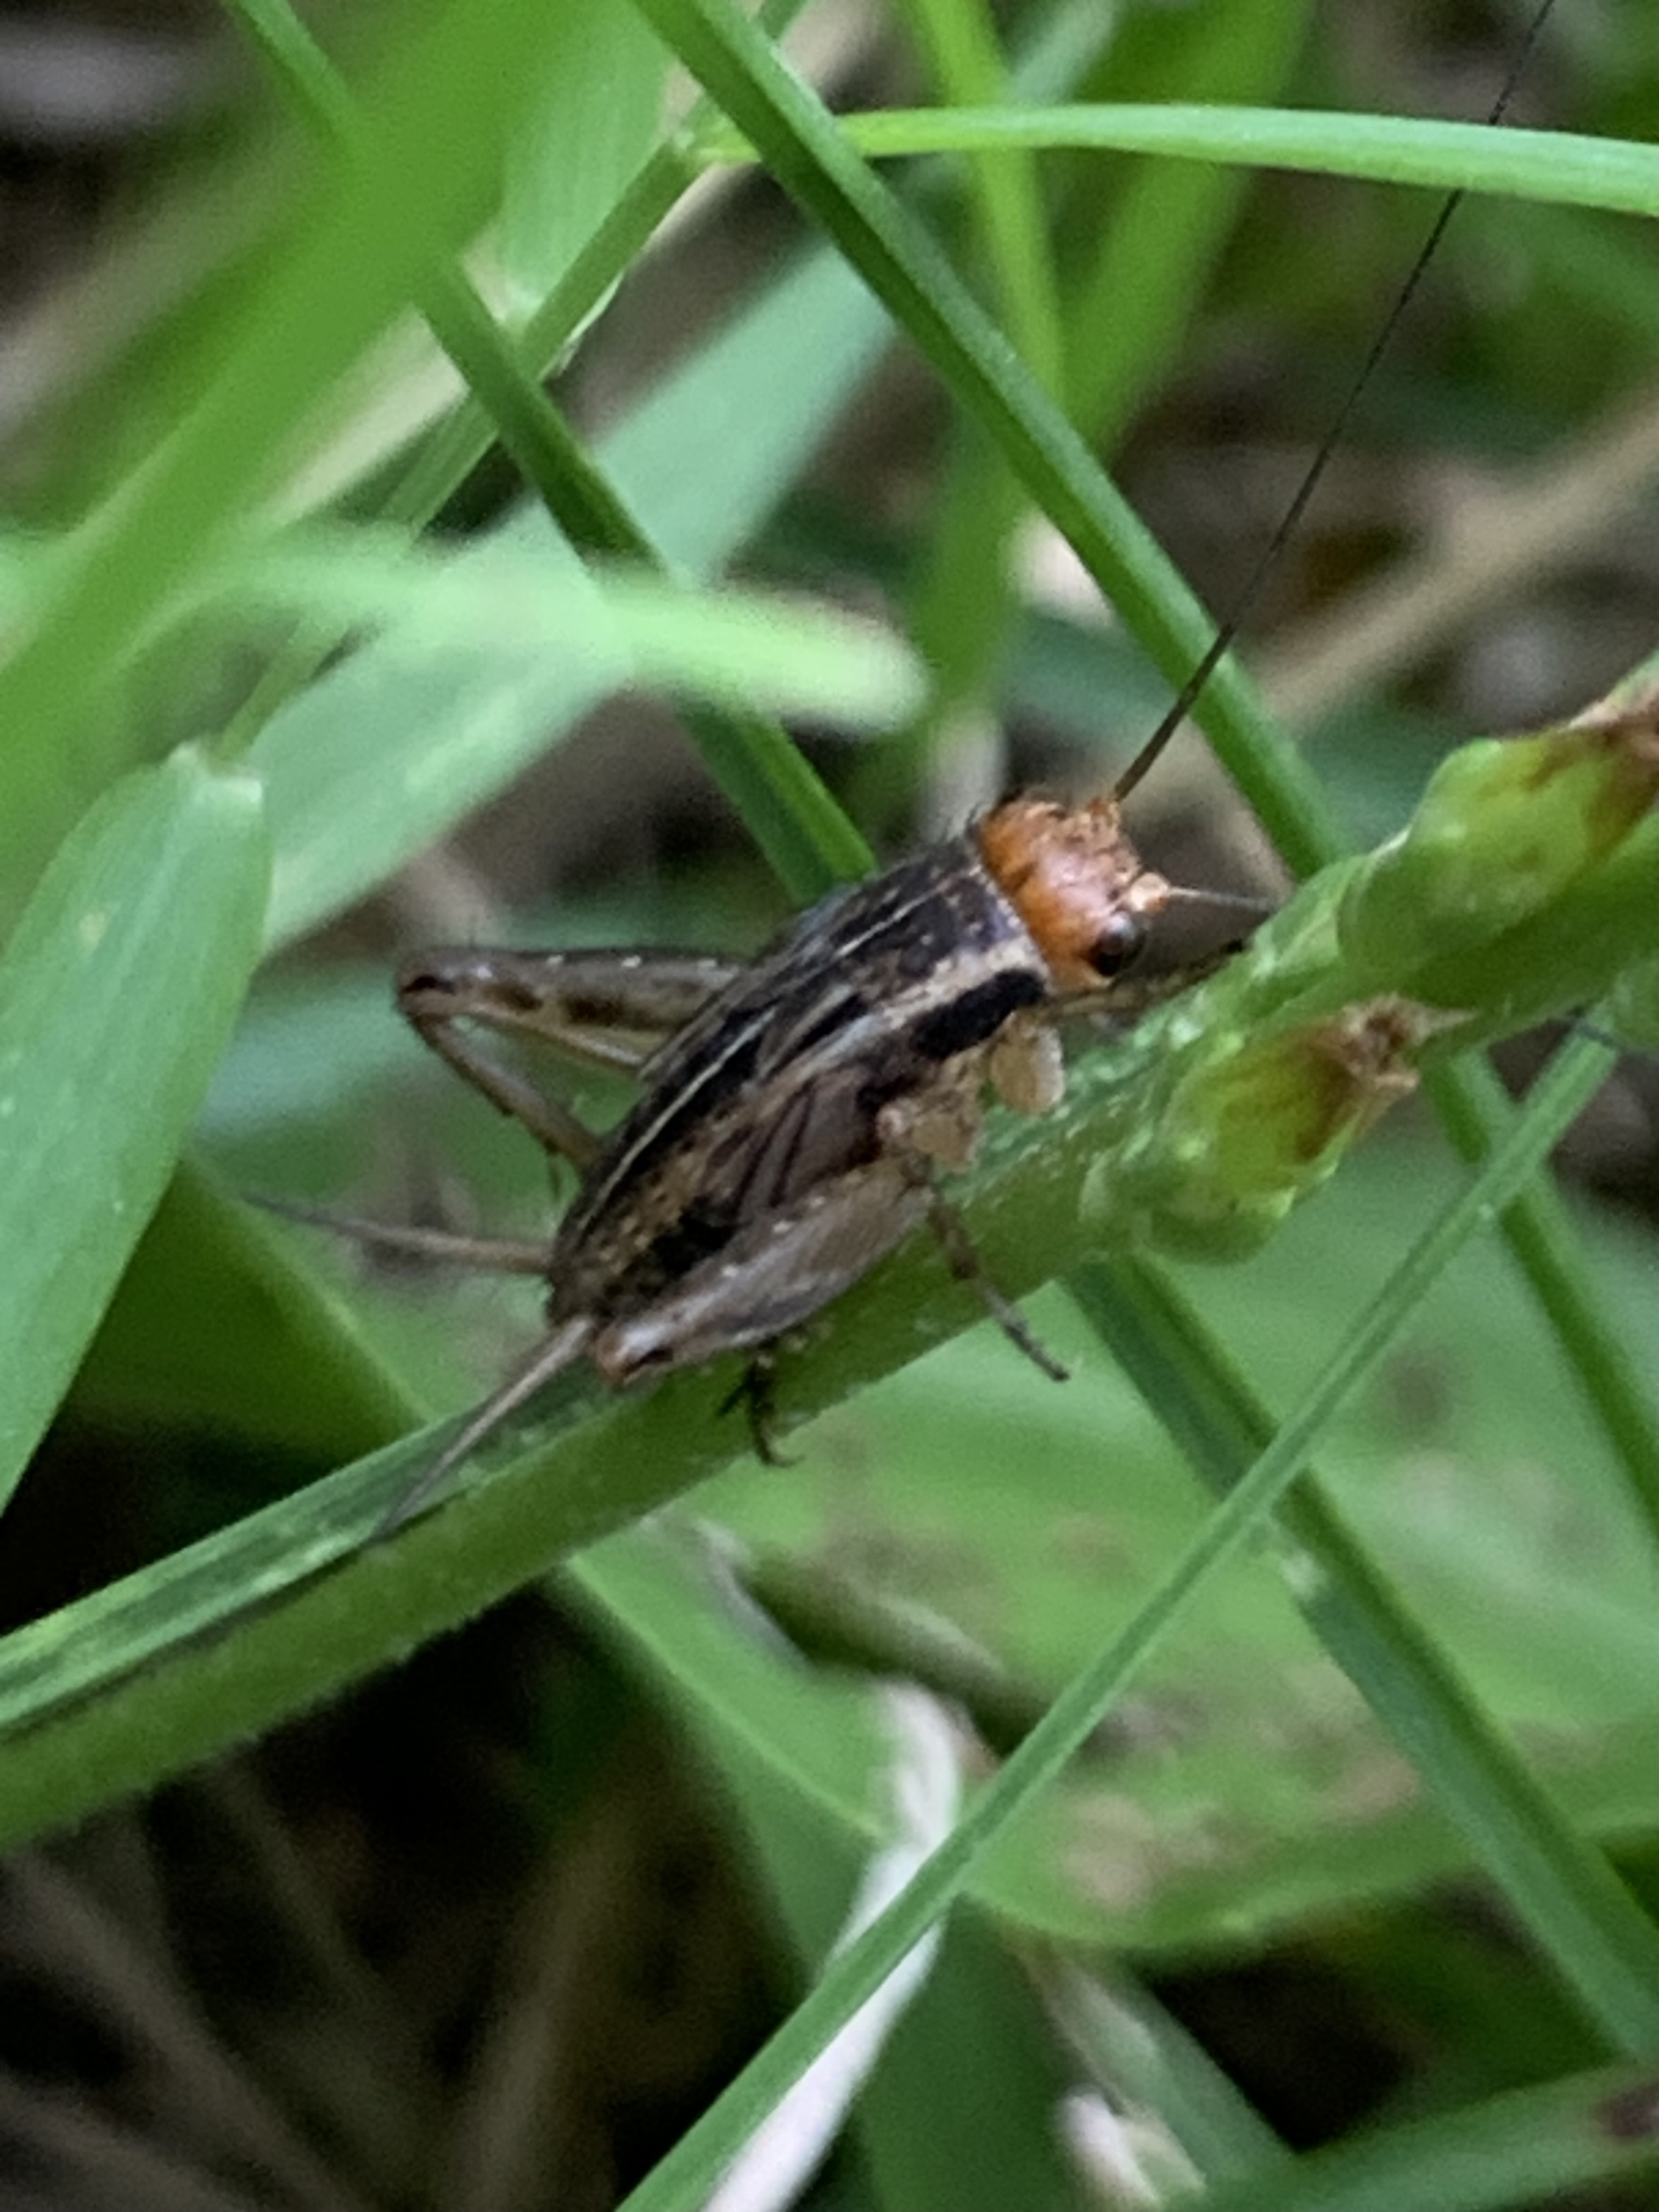 A small, brown cricket with bold stripes, long antennae and two “horns” (cerci) at the rear of its abdomen, sits on a blade of grass. A Brown Trig in the author’s yard. Not certain ithis one is a Say’s Trig (Karen is not an entomologist), but there’s a bunch of them. 2 or 3 jump away at every footfall.